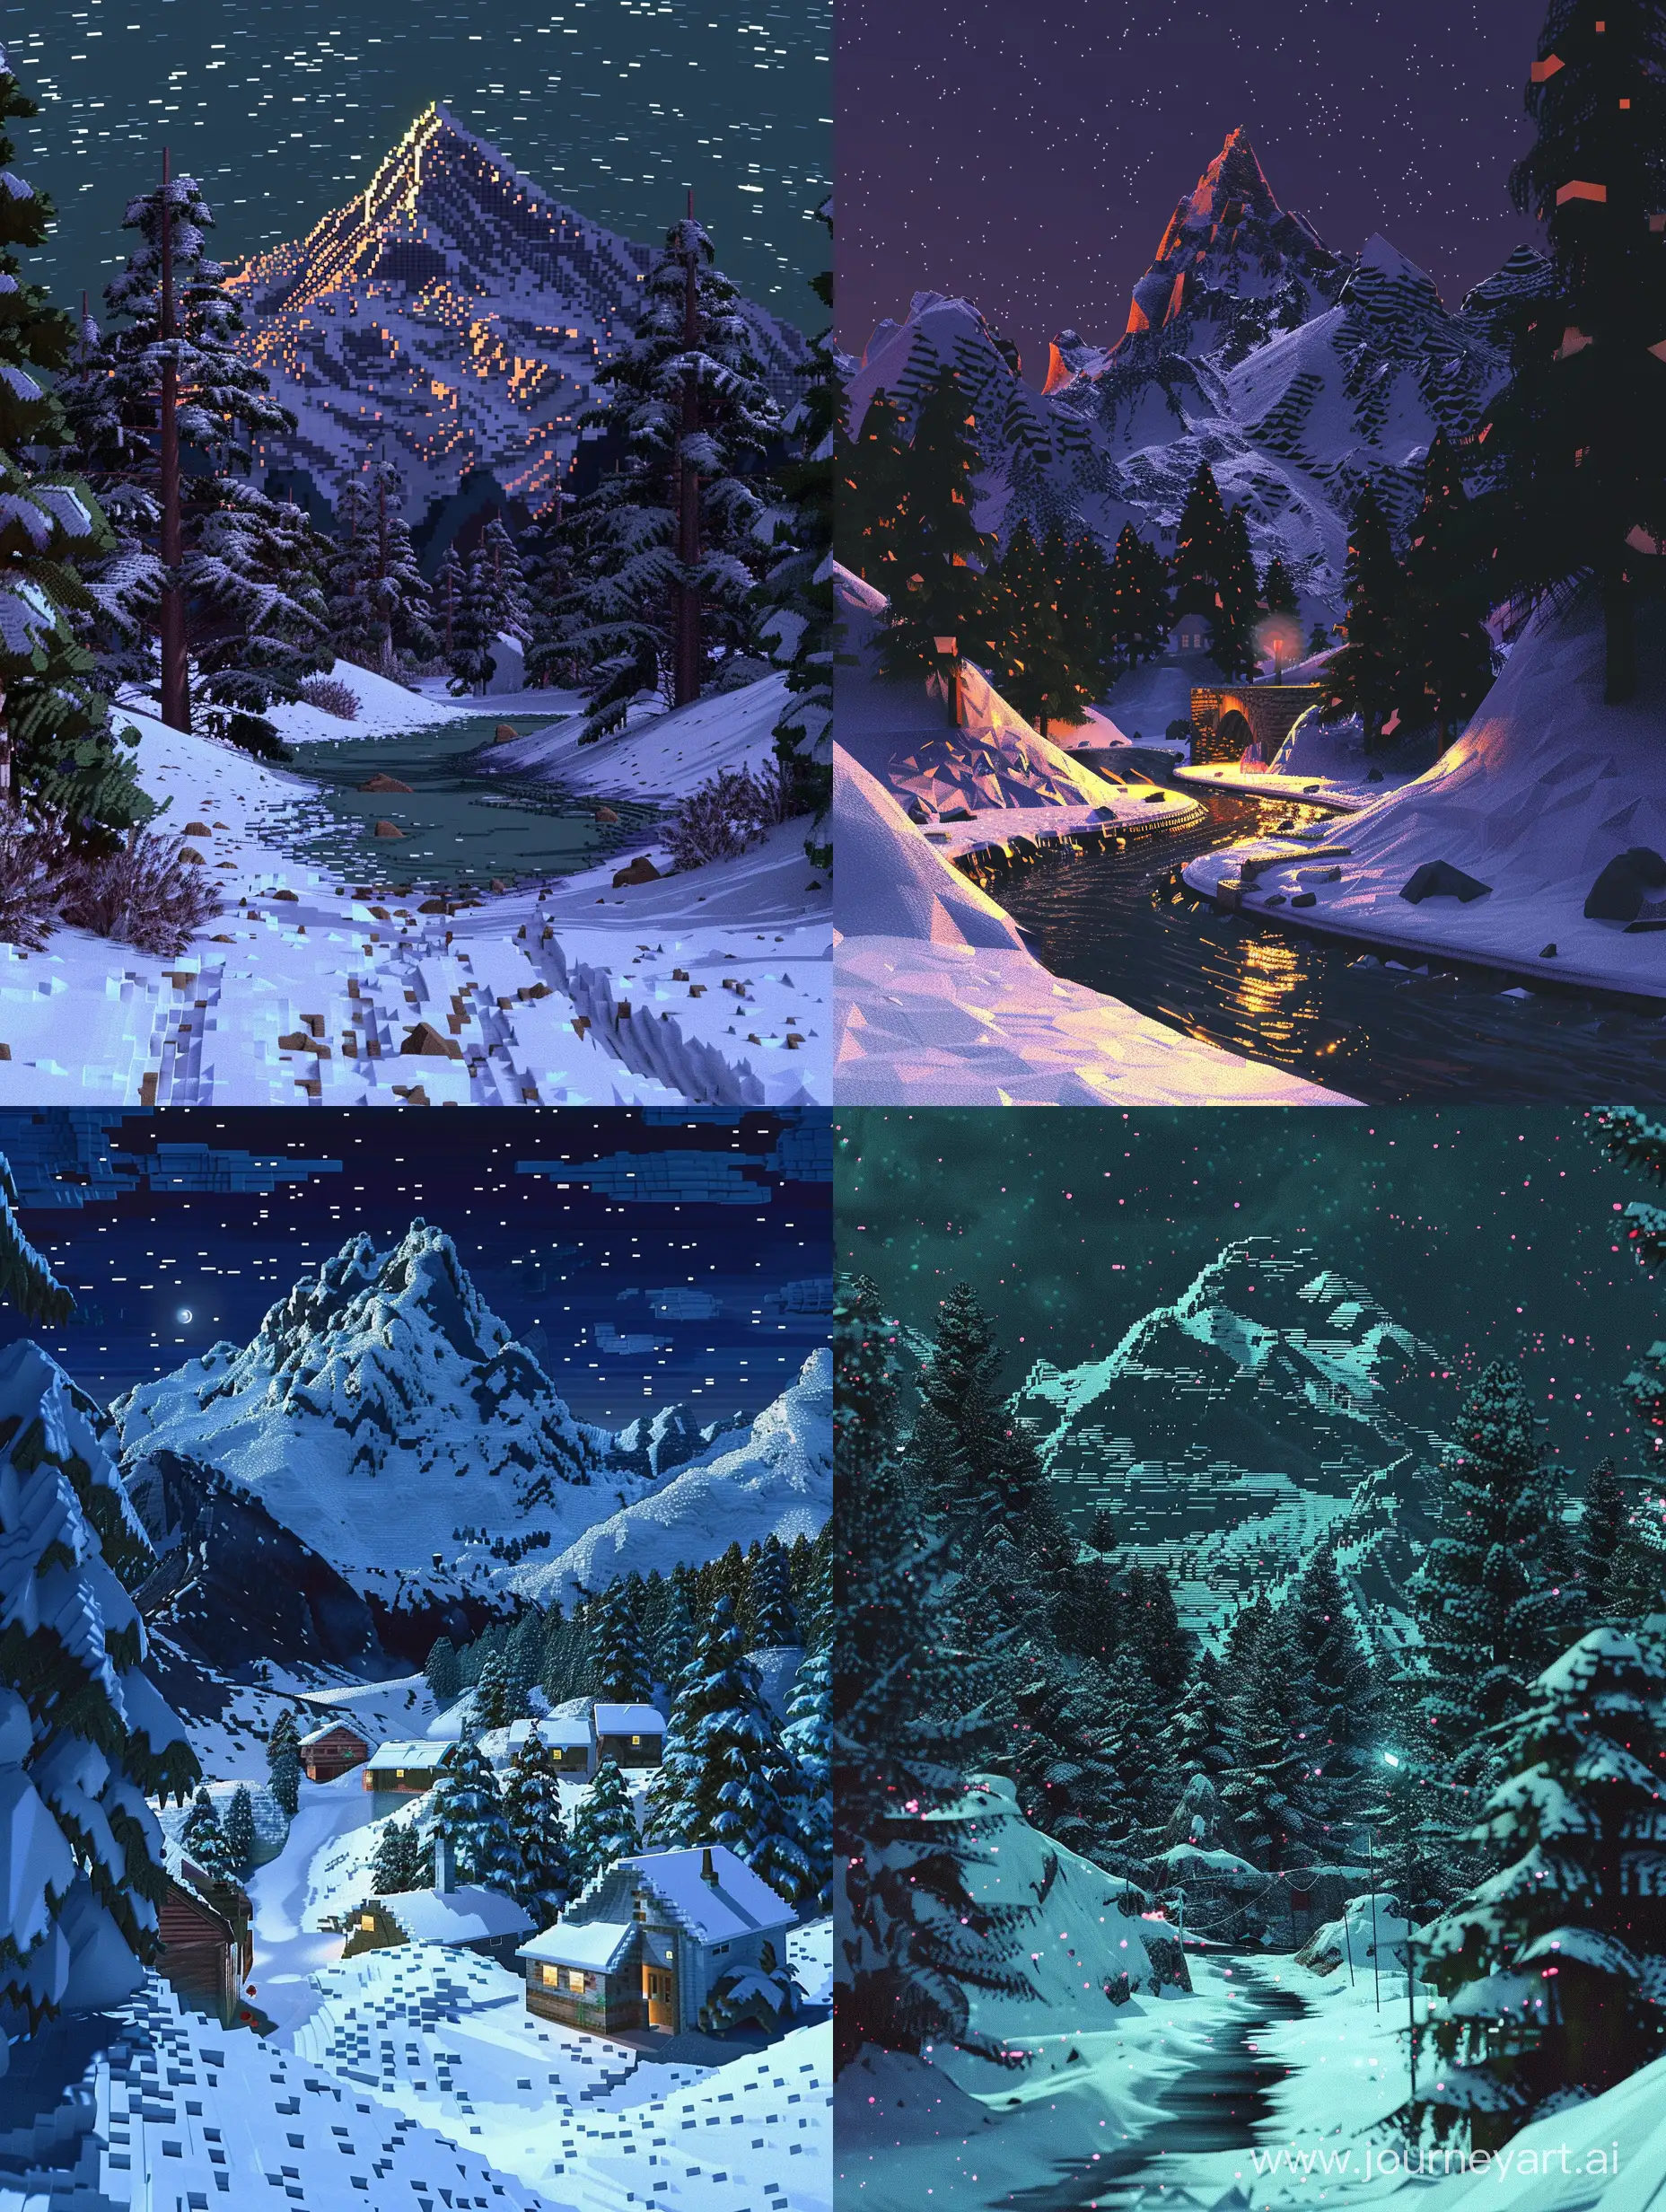 2000s video game snowy mountain scene, nostalgia, nighttime, haunting, low poly, computer graphics, digital glitch, nintendo 64 graphics